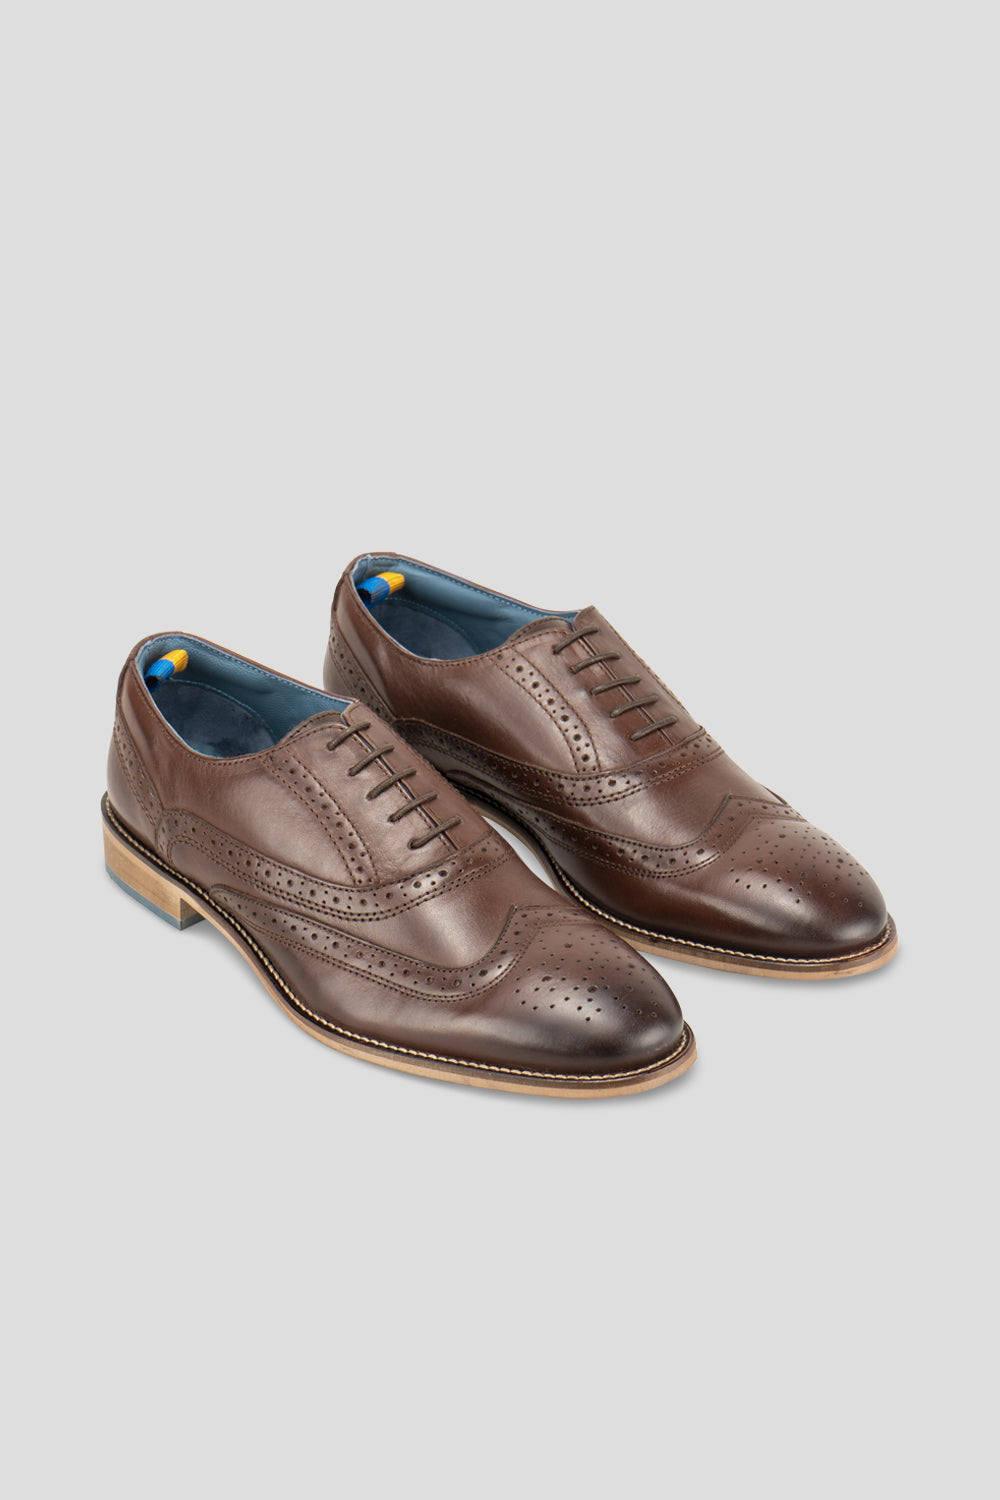 Winston Brown Mens Leather Oxford Brogue Shoes | Oswin Hyde